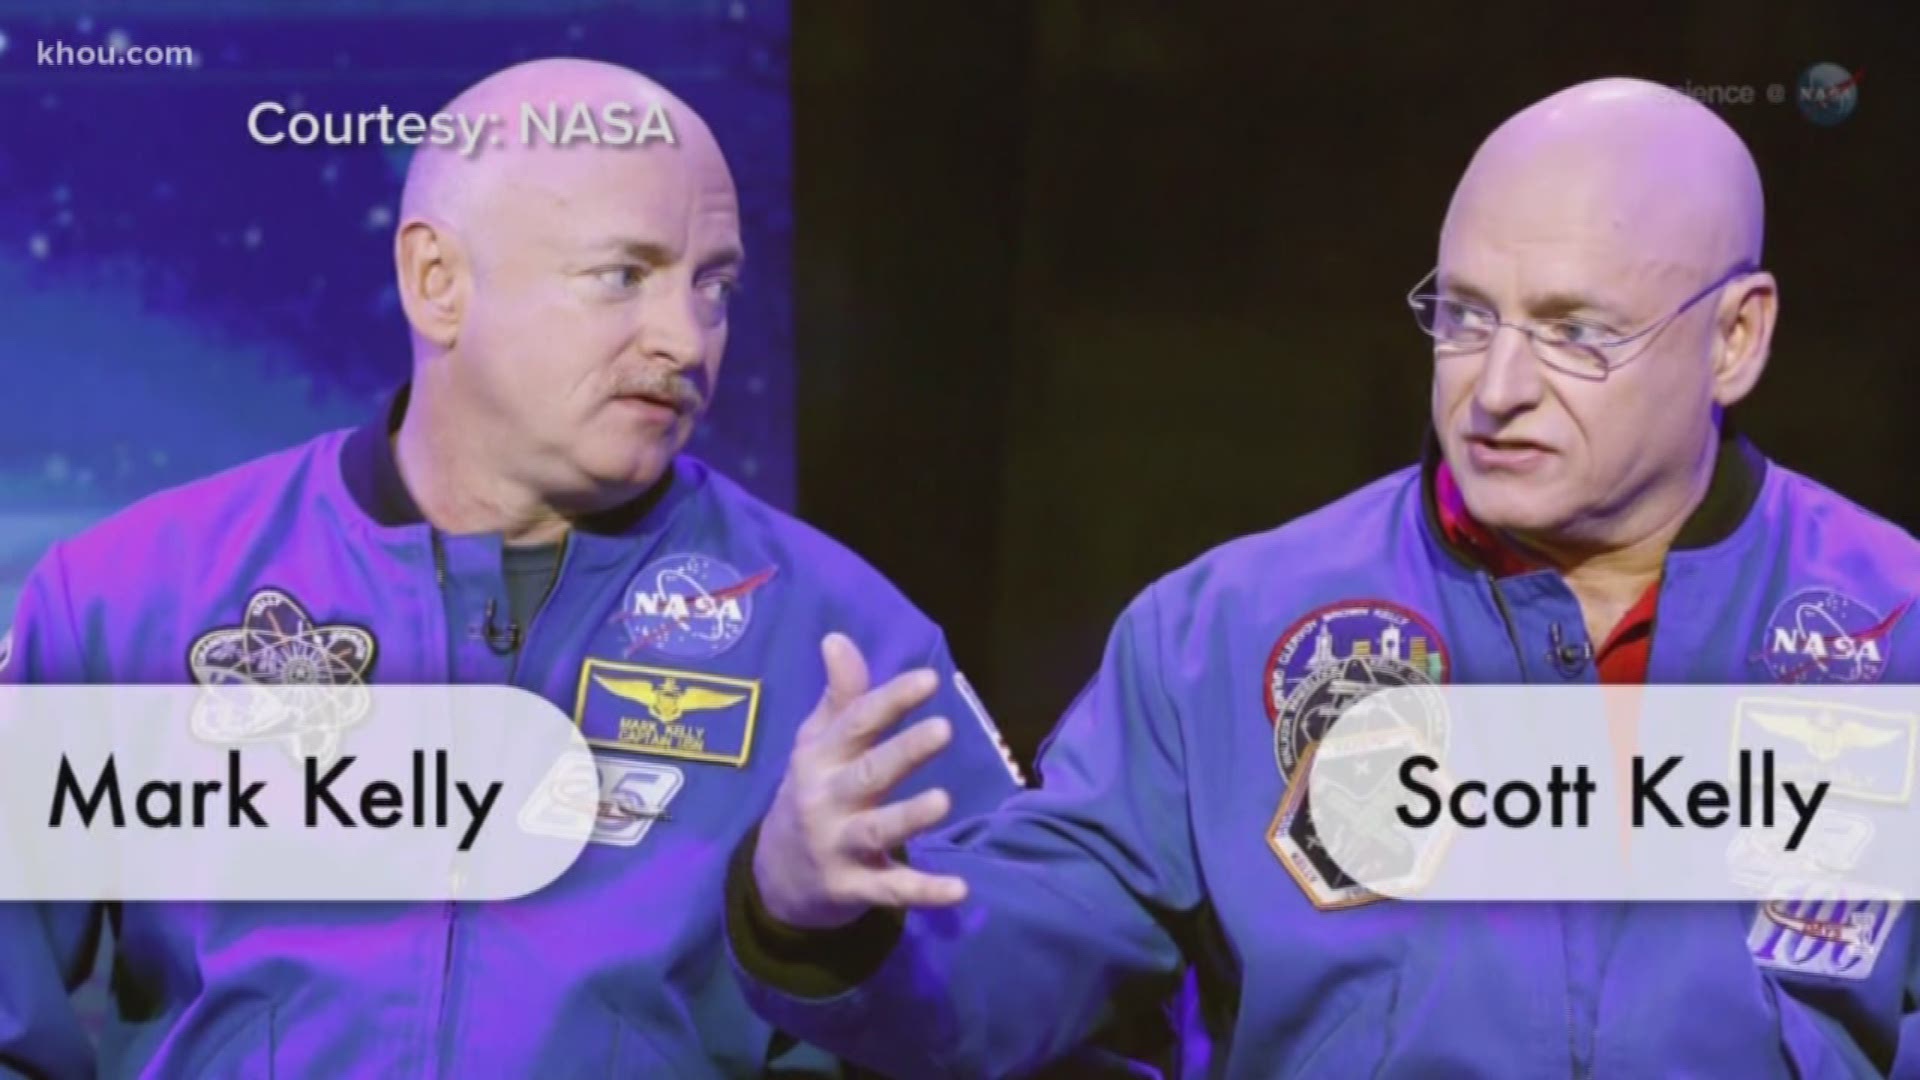 The researchers behind NASA's "Twins Study" of astronaut Scott Kelly and his twin Mark spoke publicly for the first time about their findings.